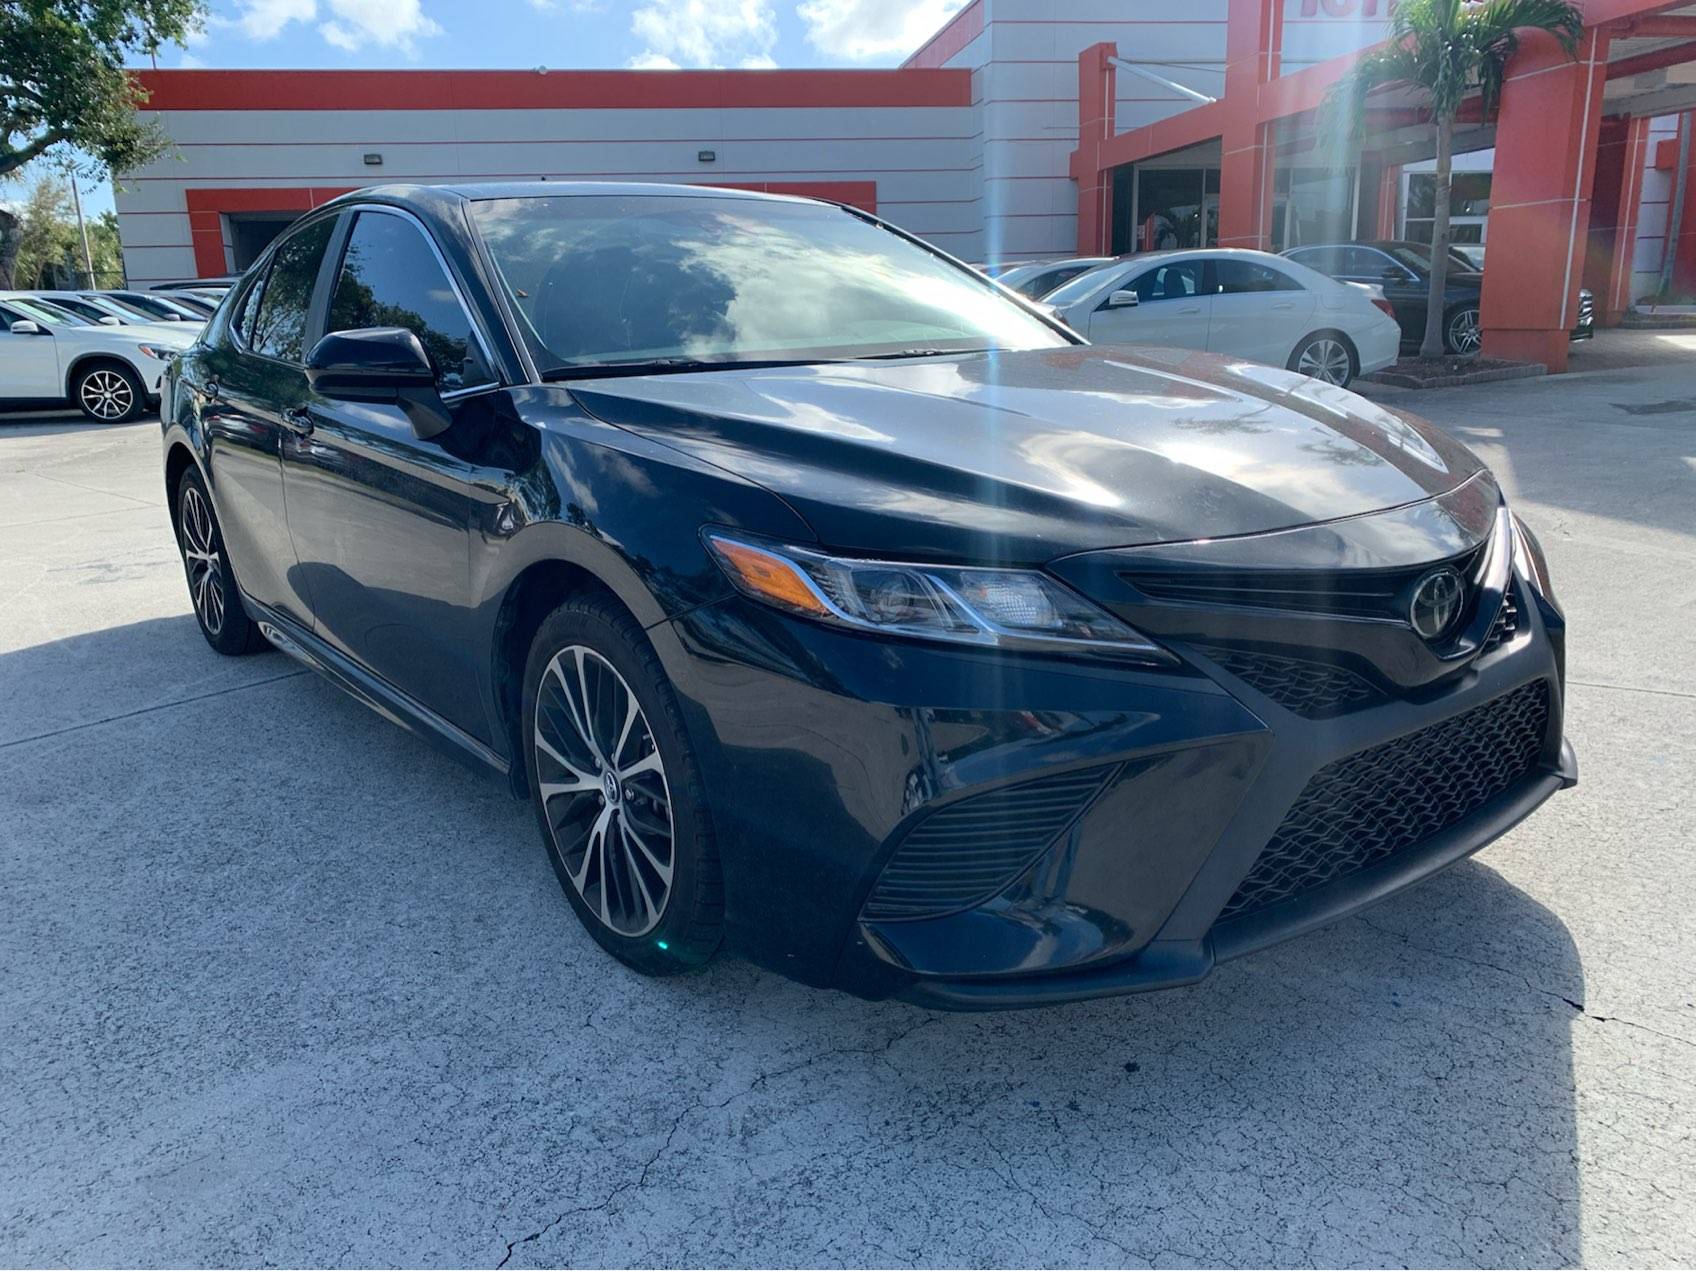 Florida Fine Cars - Used Toyota Camry 2018 WEST PALM SE